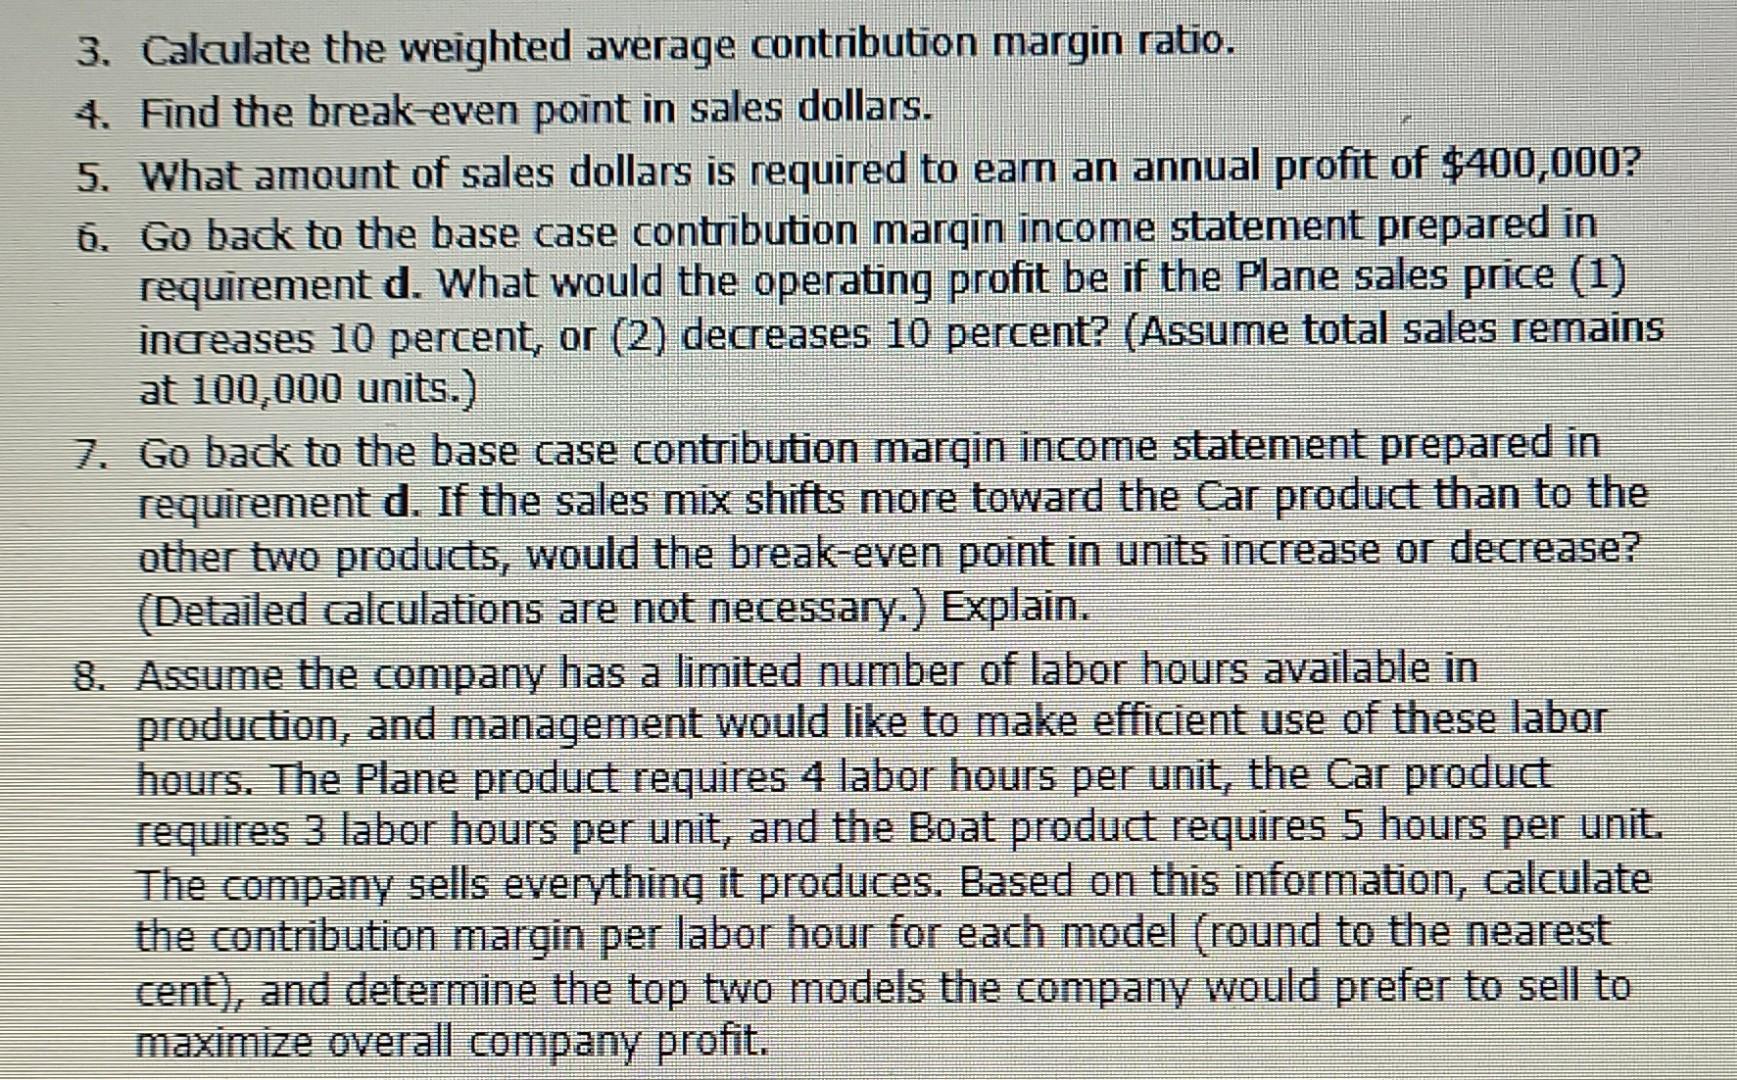 3. Calculate the weighted average contribution margin ratio.4. Find the break-even point in sales dollars.5. What amount of